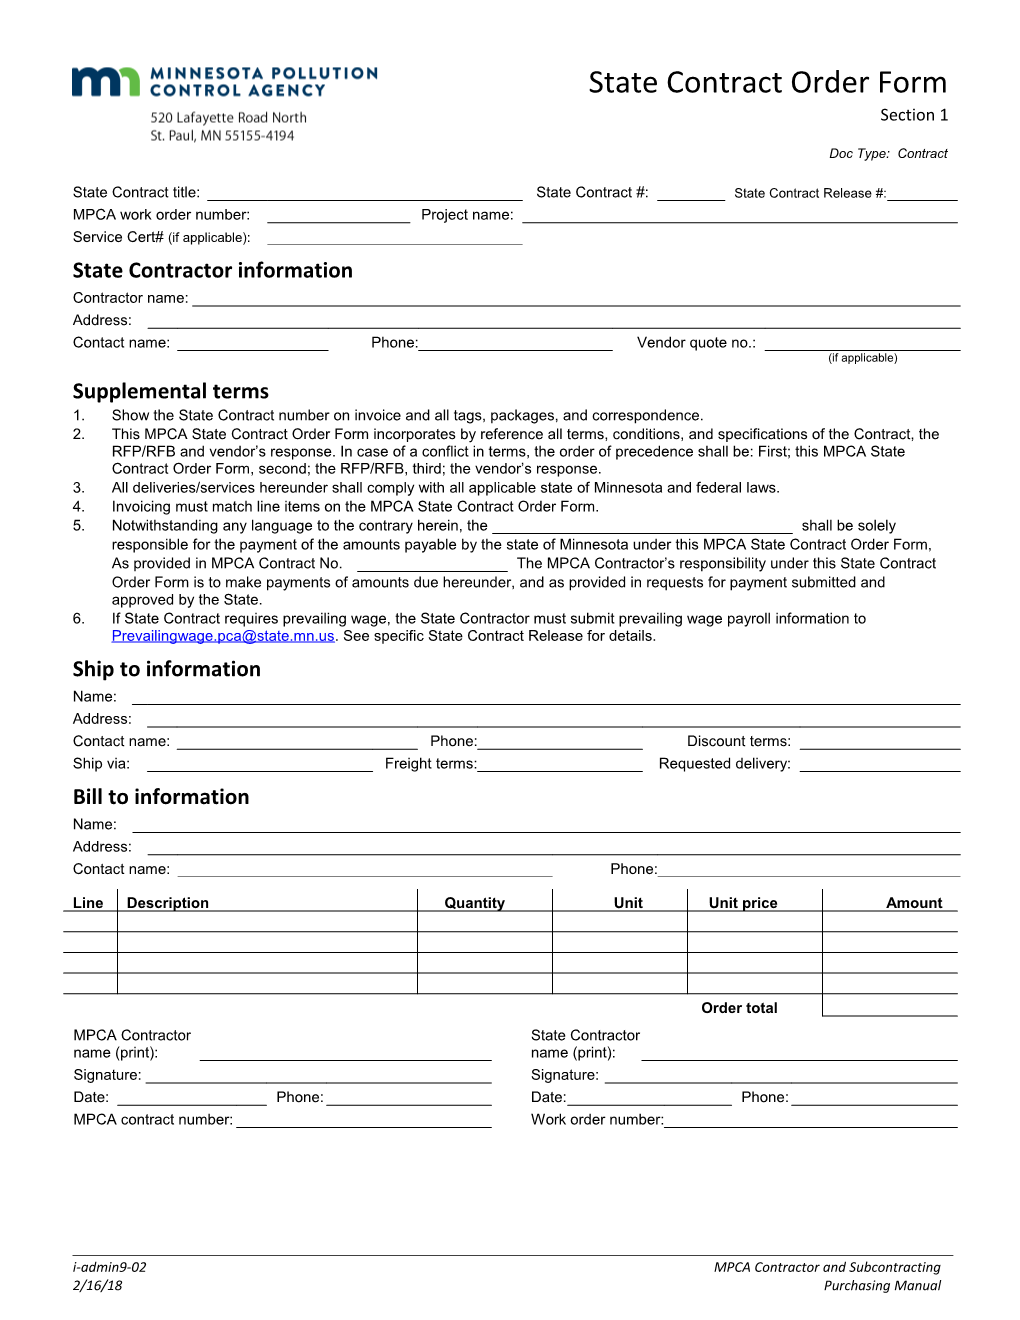 State Contract Order Form